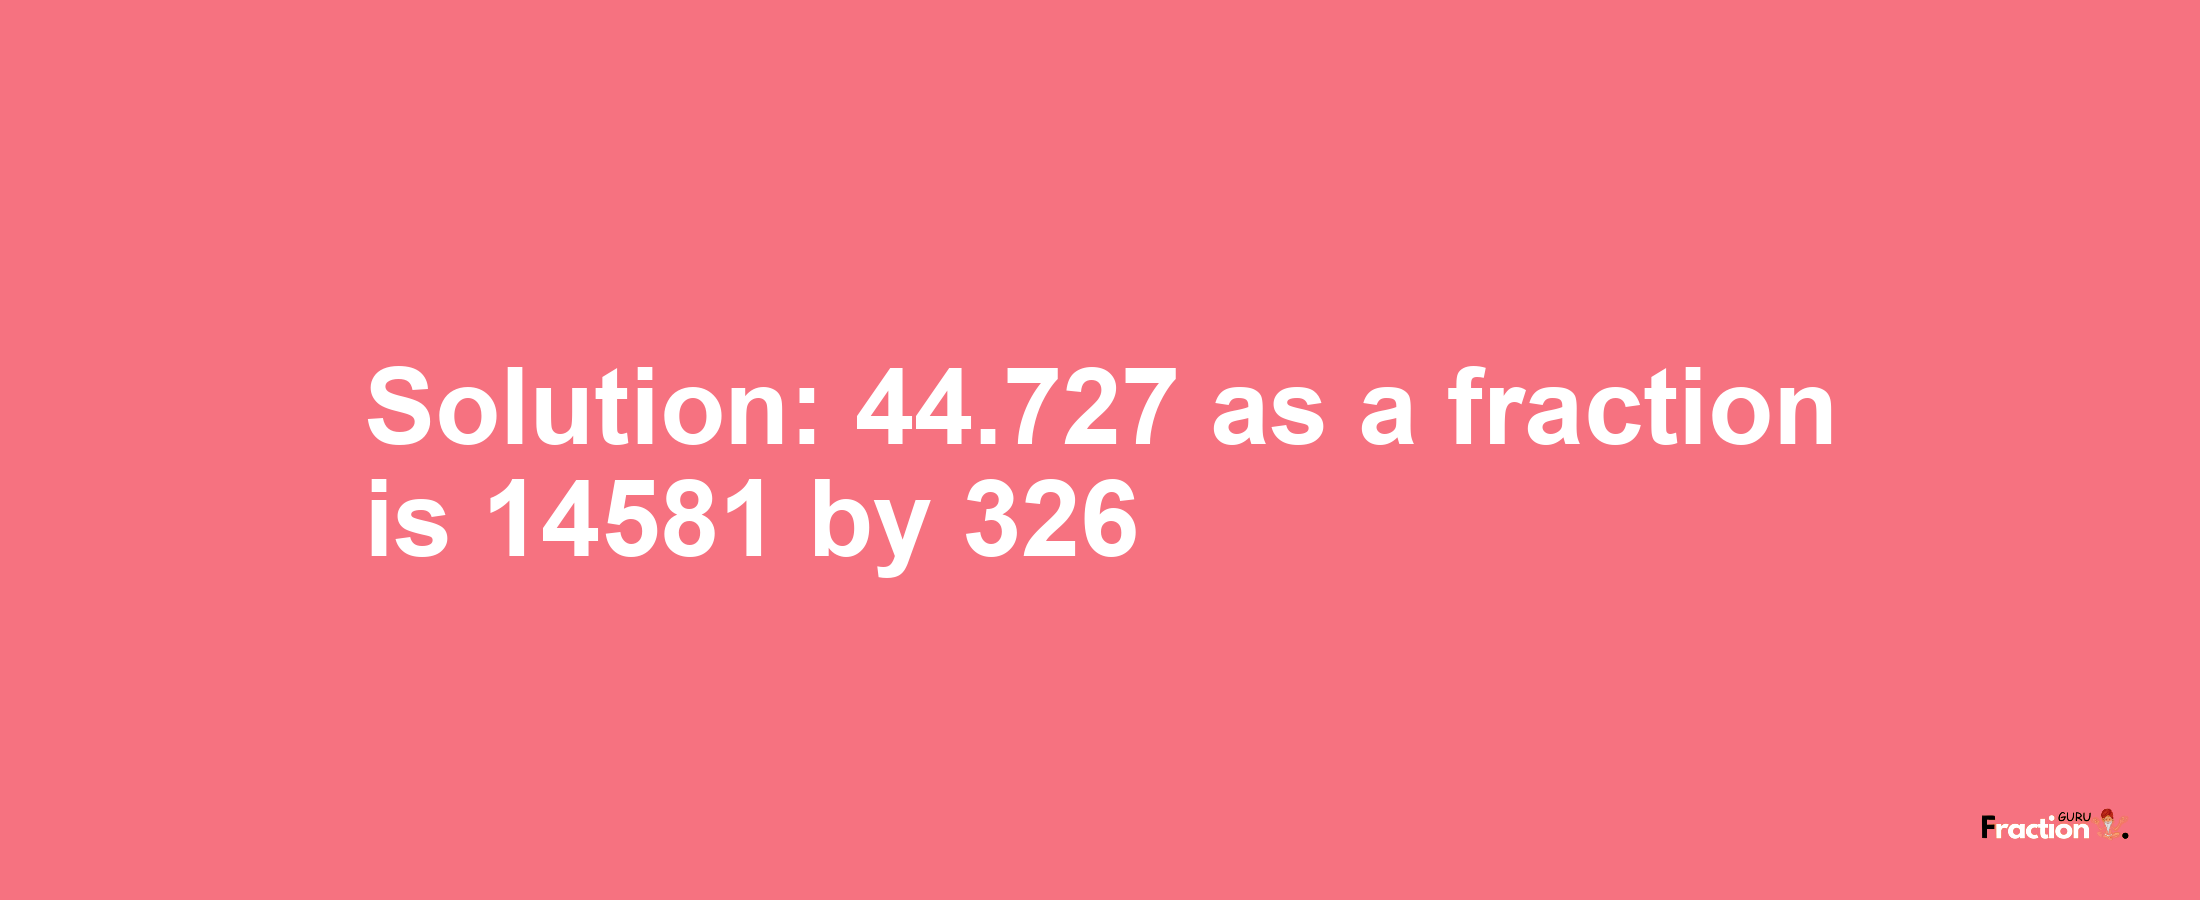 Solution:44.727 as a fraction is 14581/326